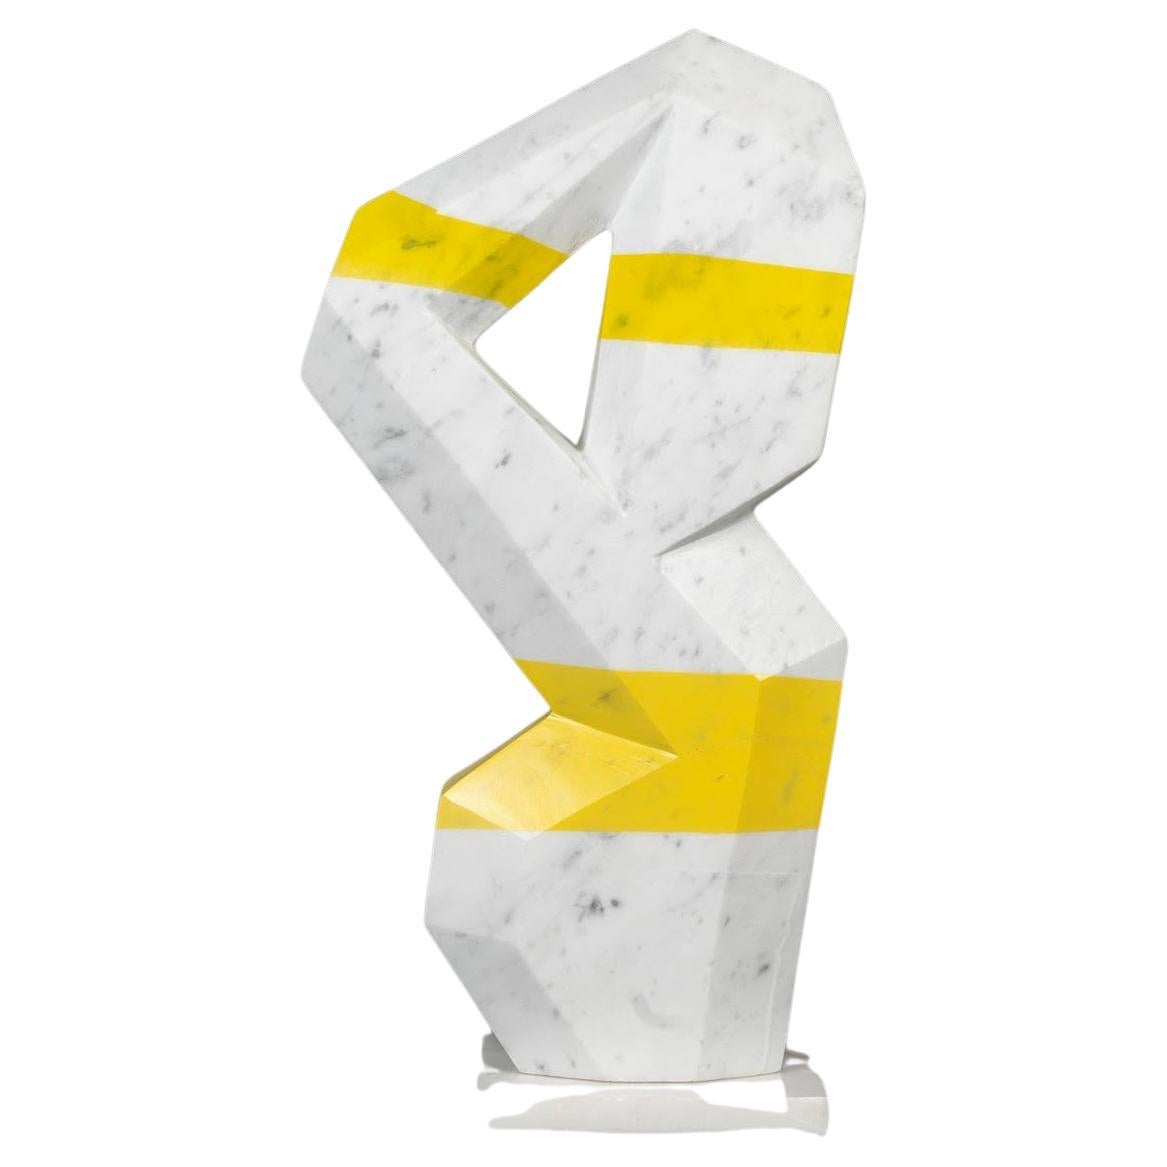 Carrara Marble Sculpture by François Fernandez, Known as SAVY, Signed. For Sale